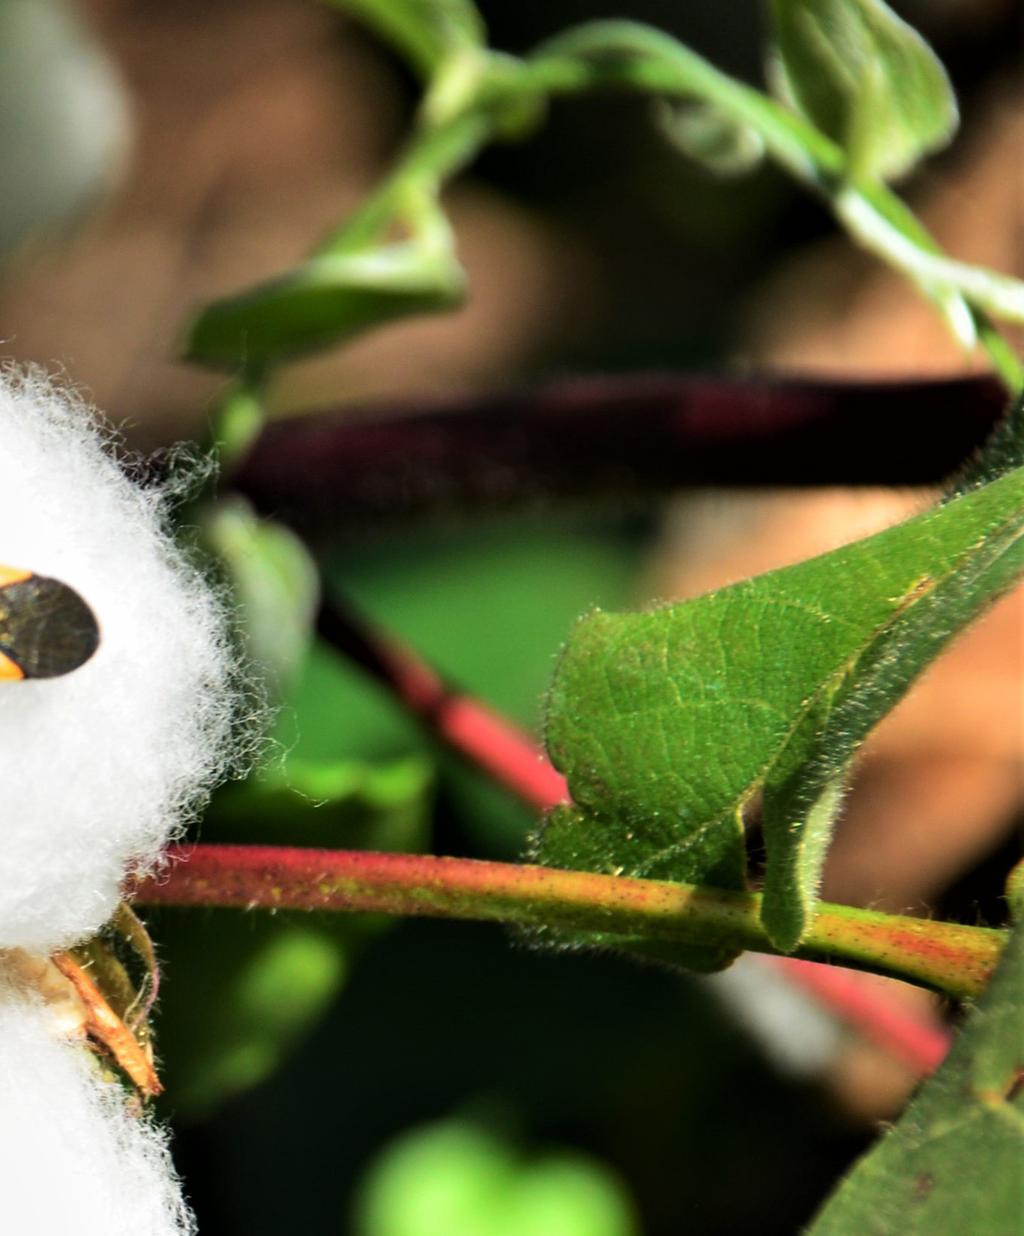 18. Does Bt have negative effects on the plant s functions The current Bt cotton varieties available on the market do not show any adverse effects and are the same as the conventional hybrids.